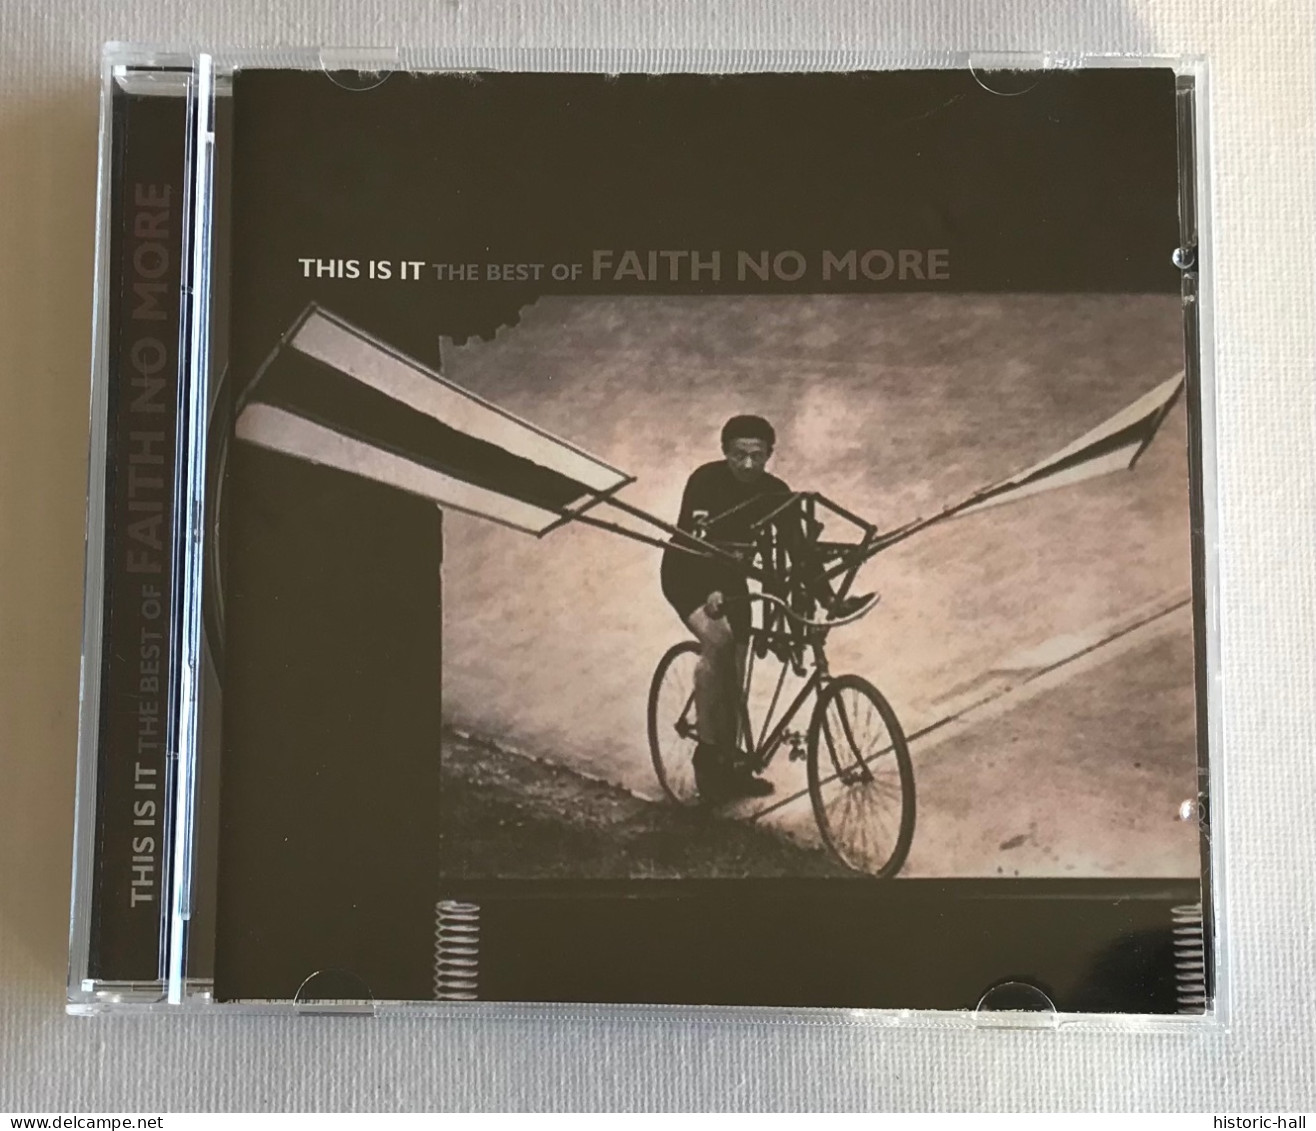 FAITH NO MORE - This Is It - CD - 2003 - Russian Press - Hard Rock & Metal